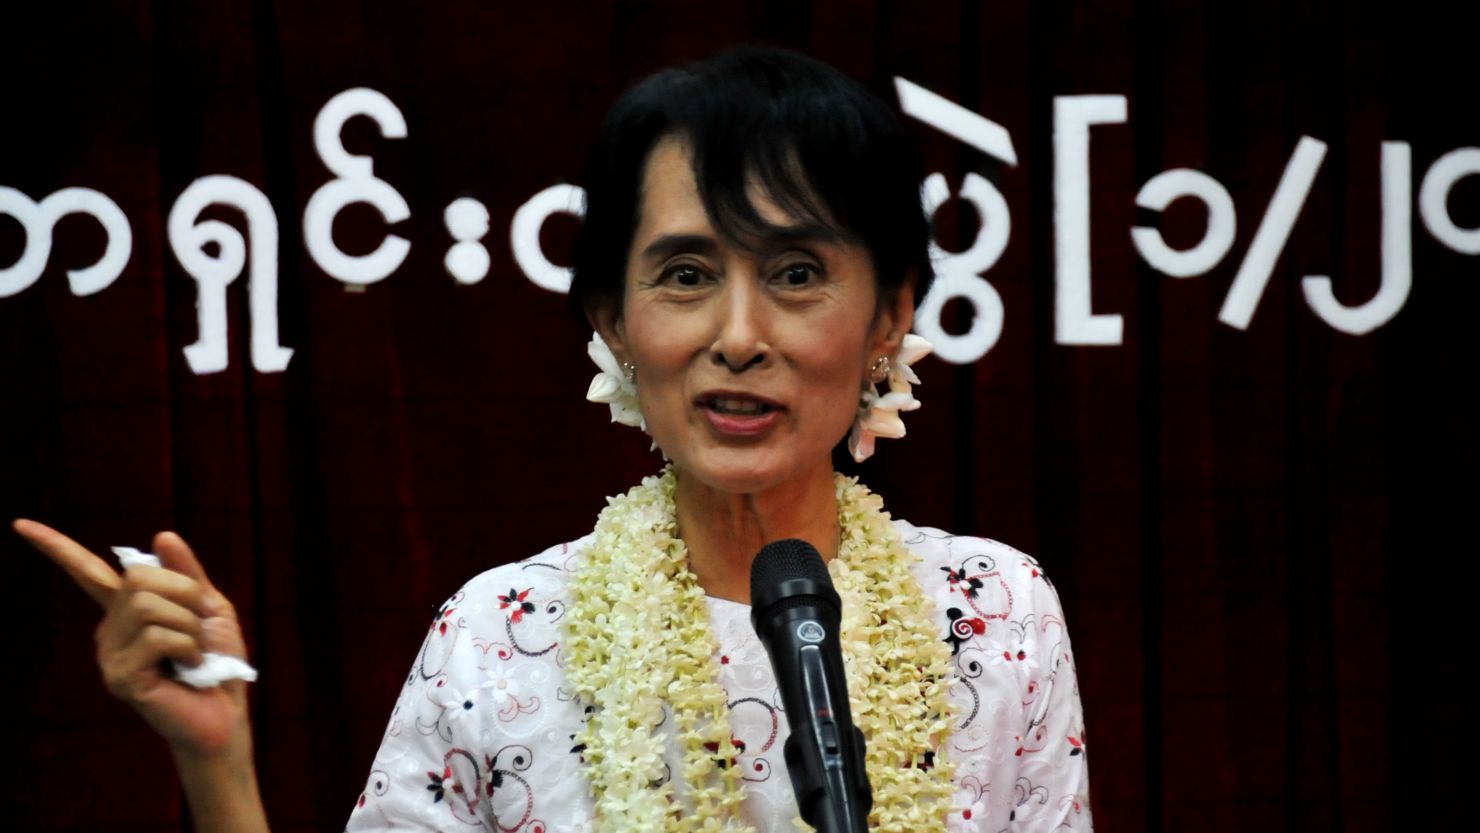 Aung San Suu Kyi talks at press conference on the anniversary of her release in Yangon, Myanmar on November 14.